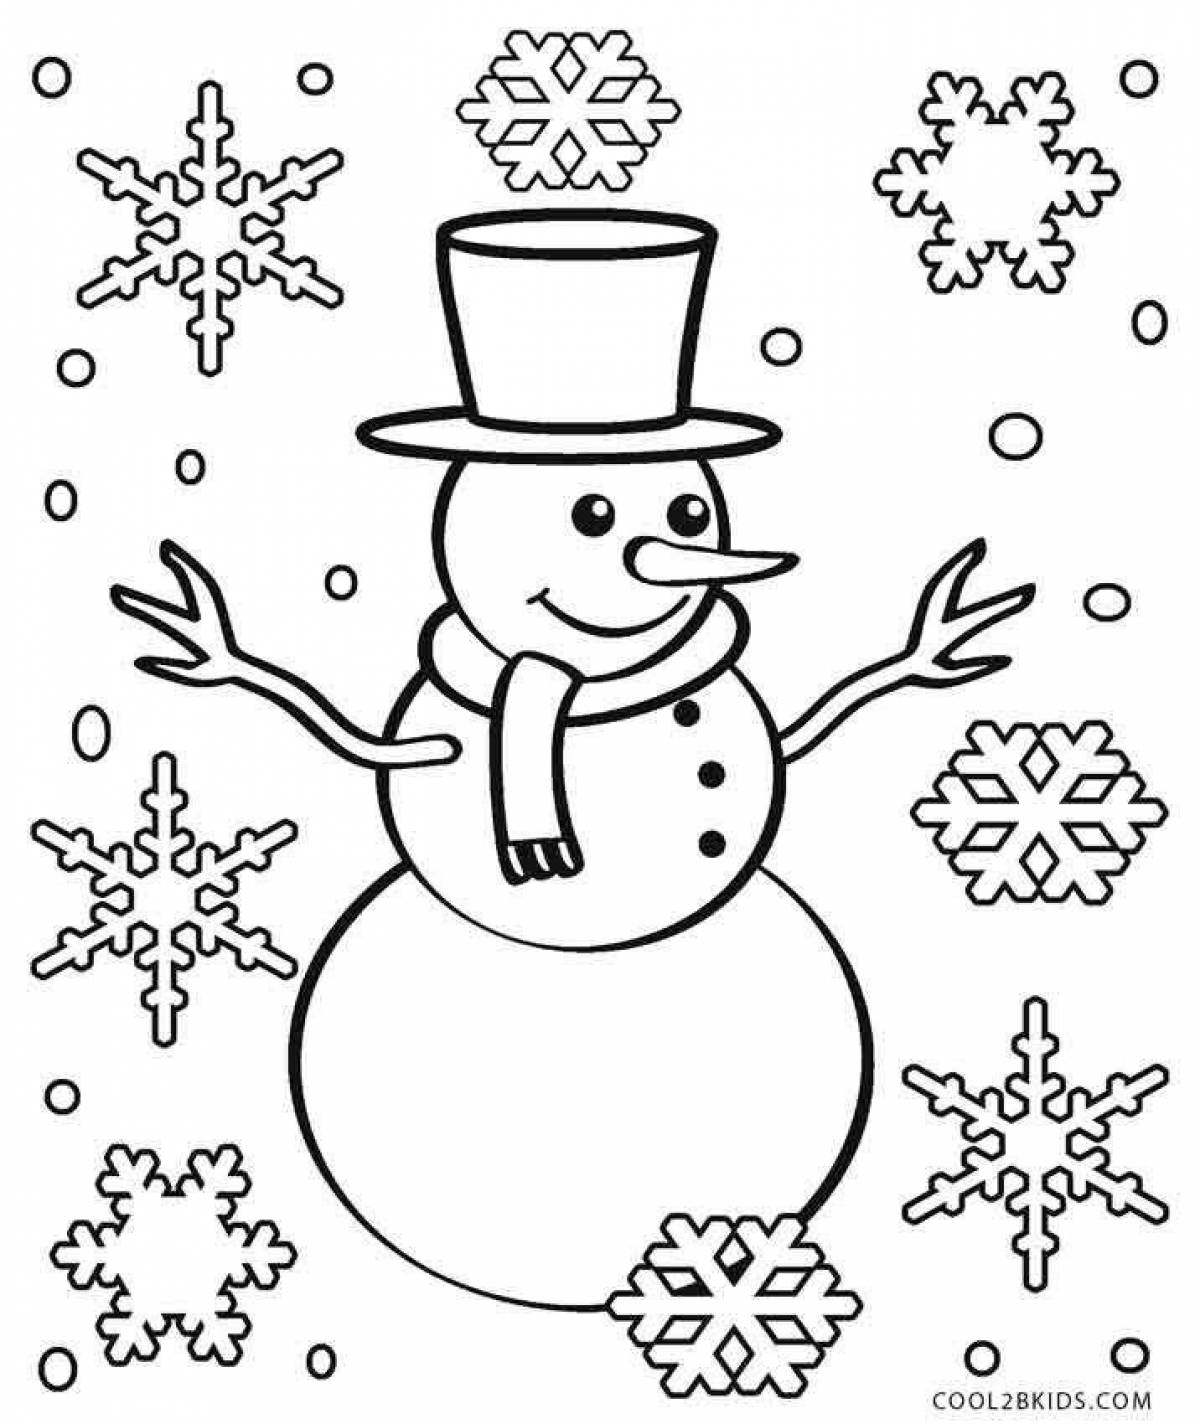 Wonderful winter coloring for children 2-3 years old